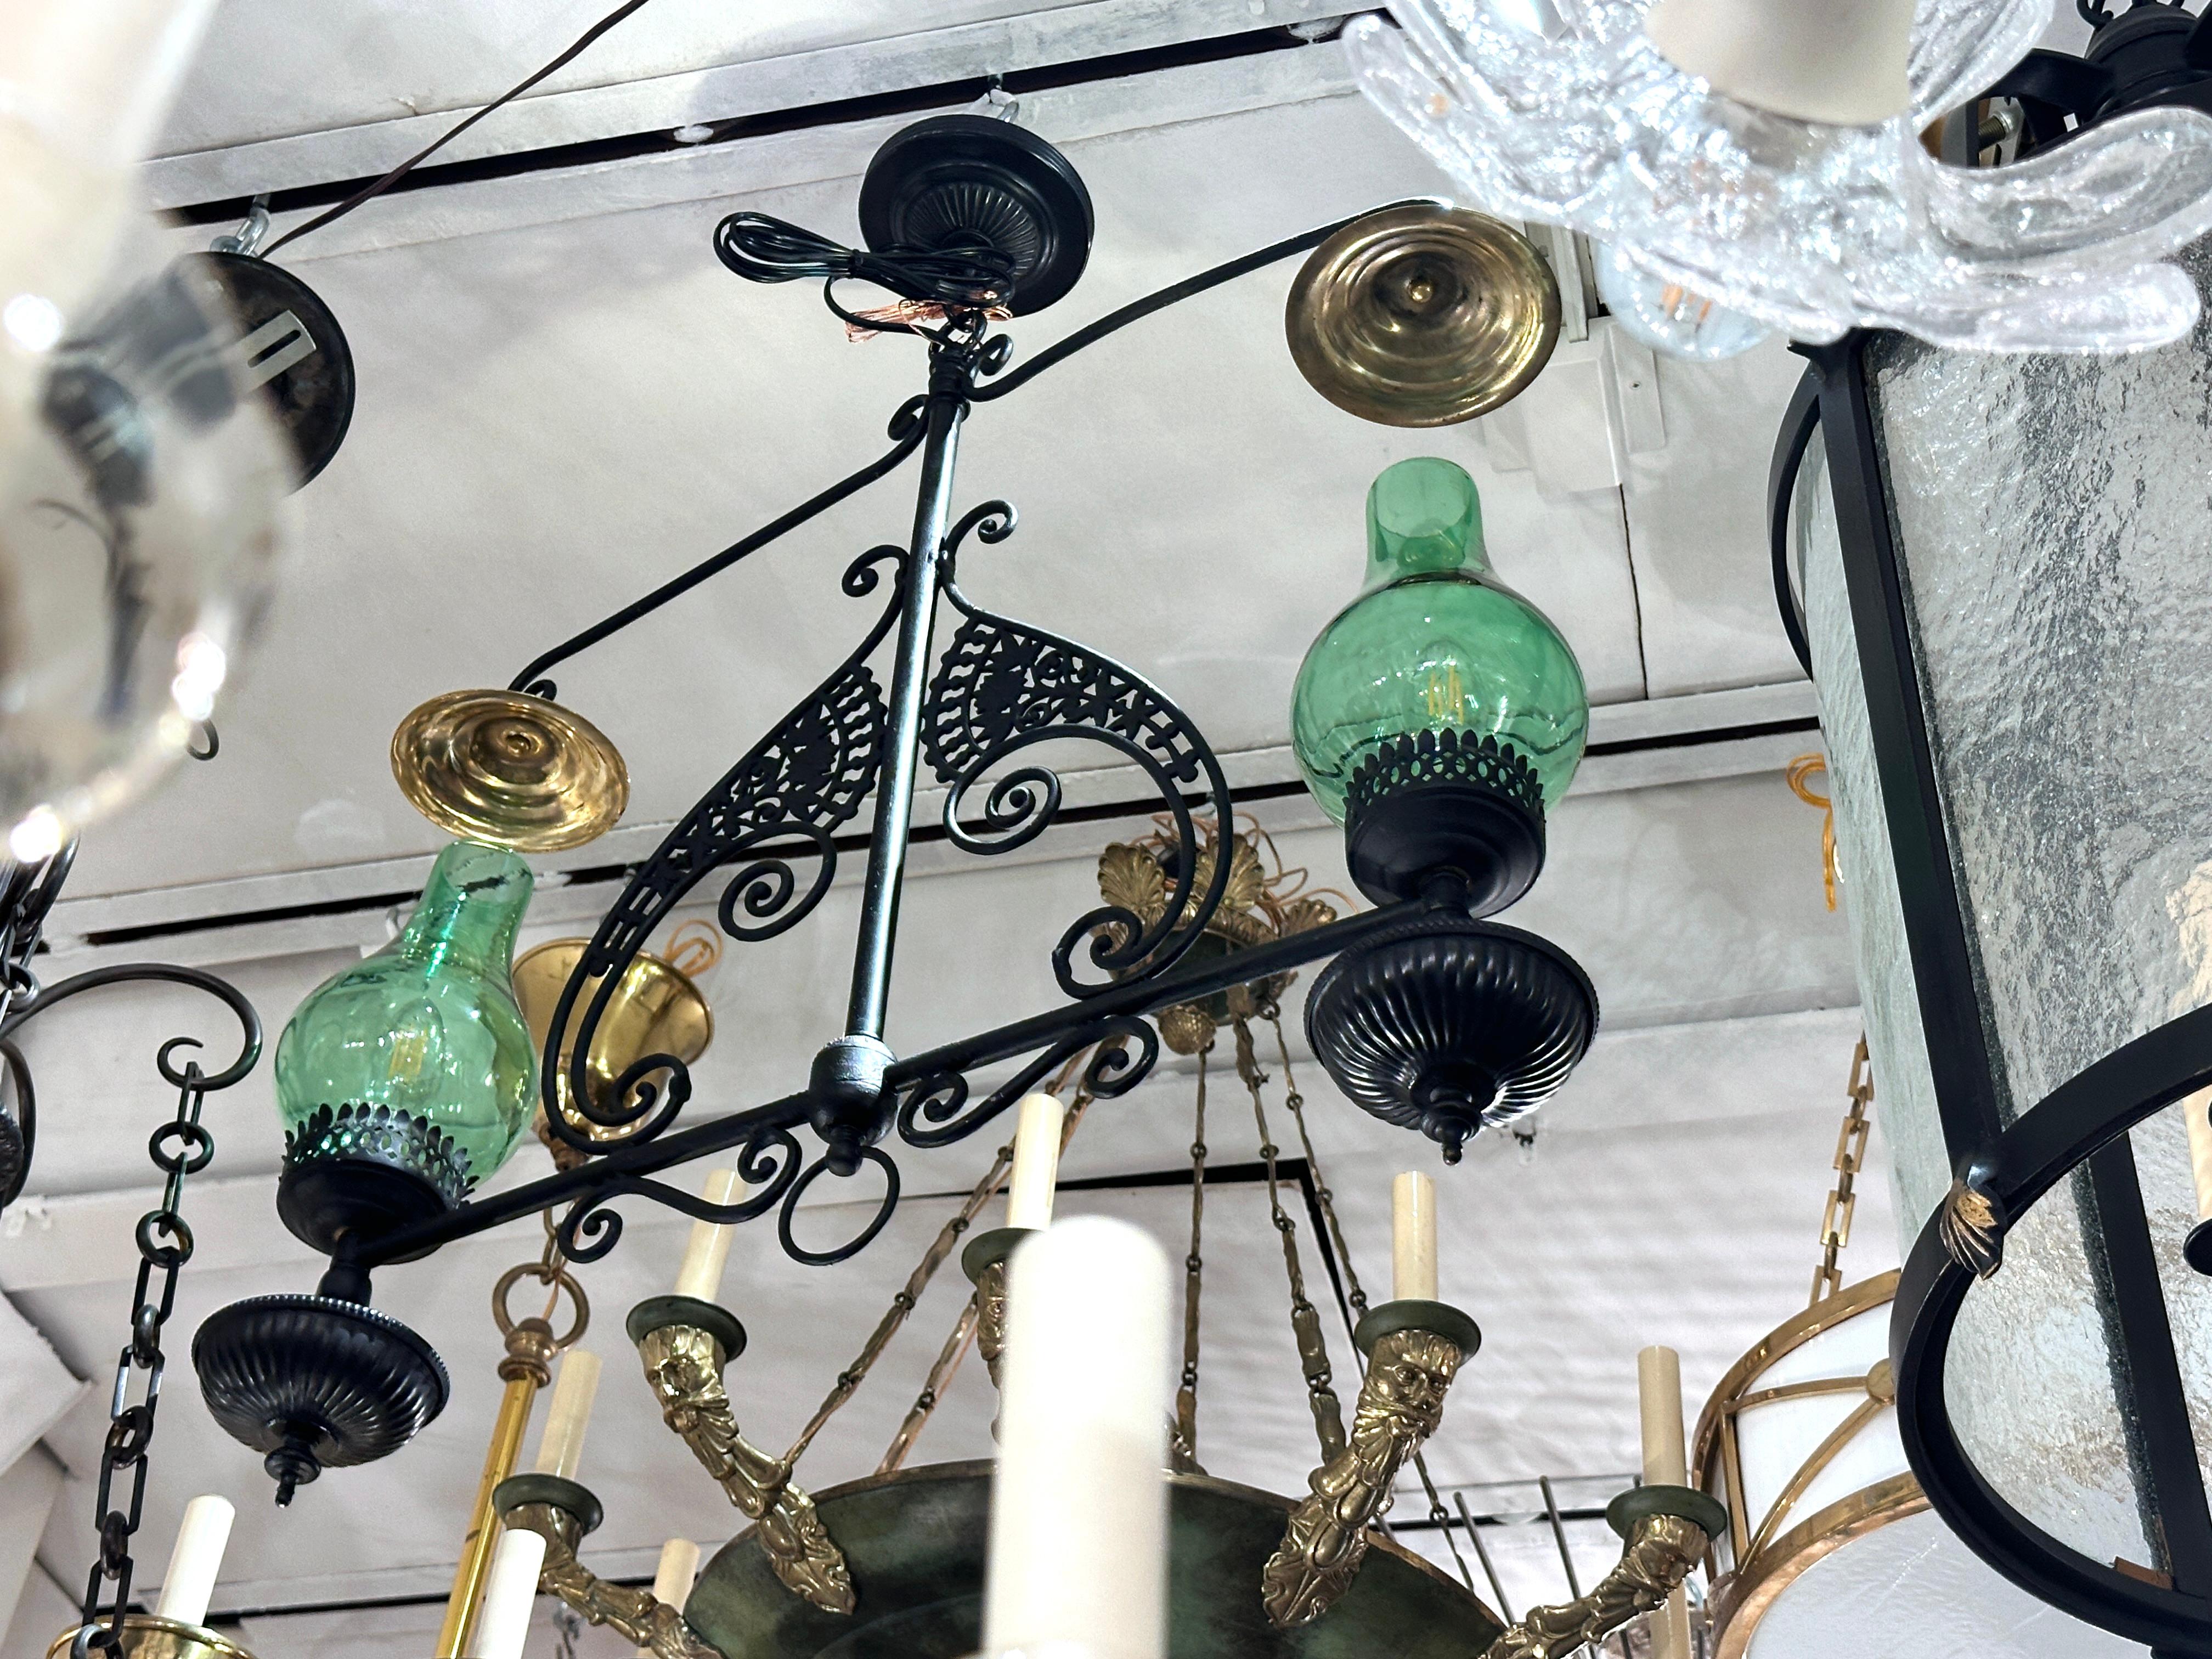 A circa 1940's French hammered metal light fixture with foliage motif and green glass hurricanes.

Measurements:
Drop: 26